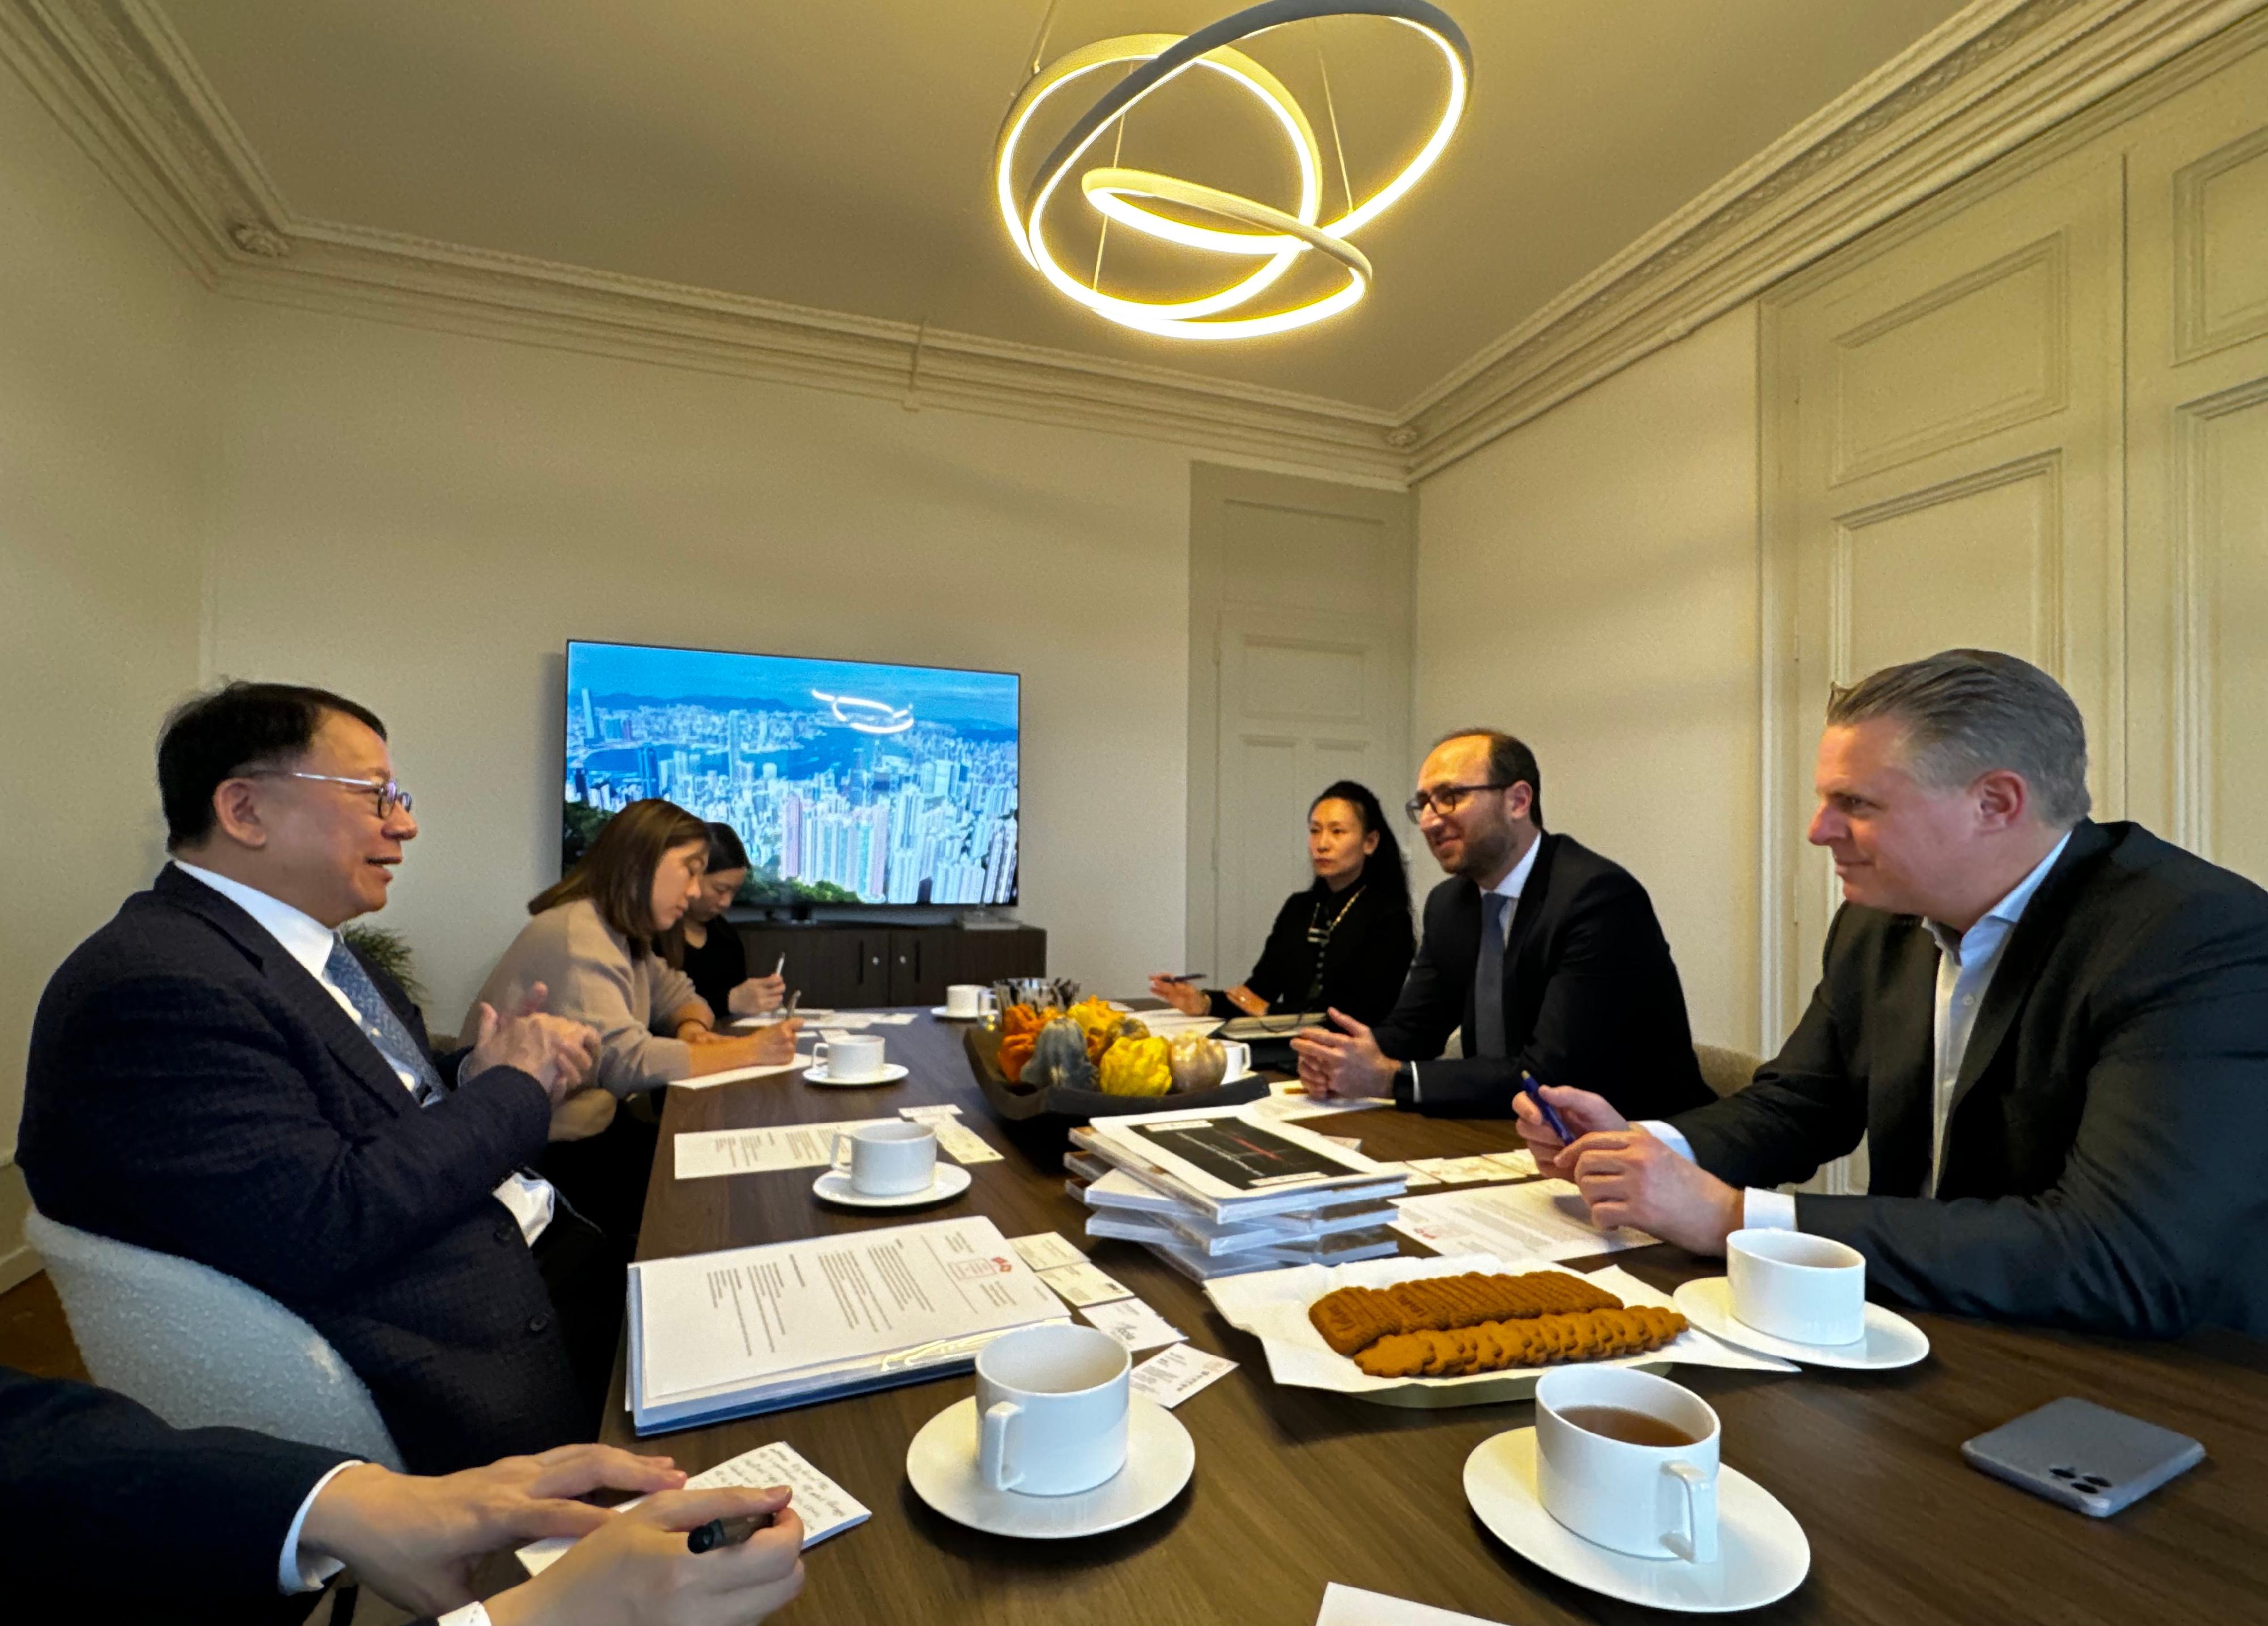 The Chief Secretary for Administration, Mr Chan Kwok-ki (first left), meets with the Vice President of the Swiss-Chinese Chamber of Commerce, Romandie Chapter, Mr Vincent Subilia (first right), and other members of the Chamber during his stay in Switzerland on January 23 (Geneva time).